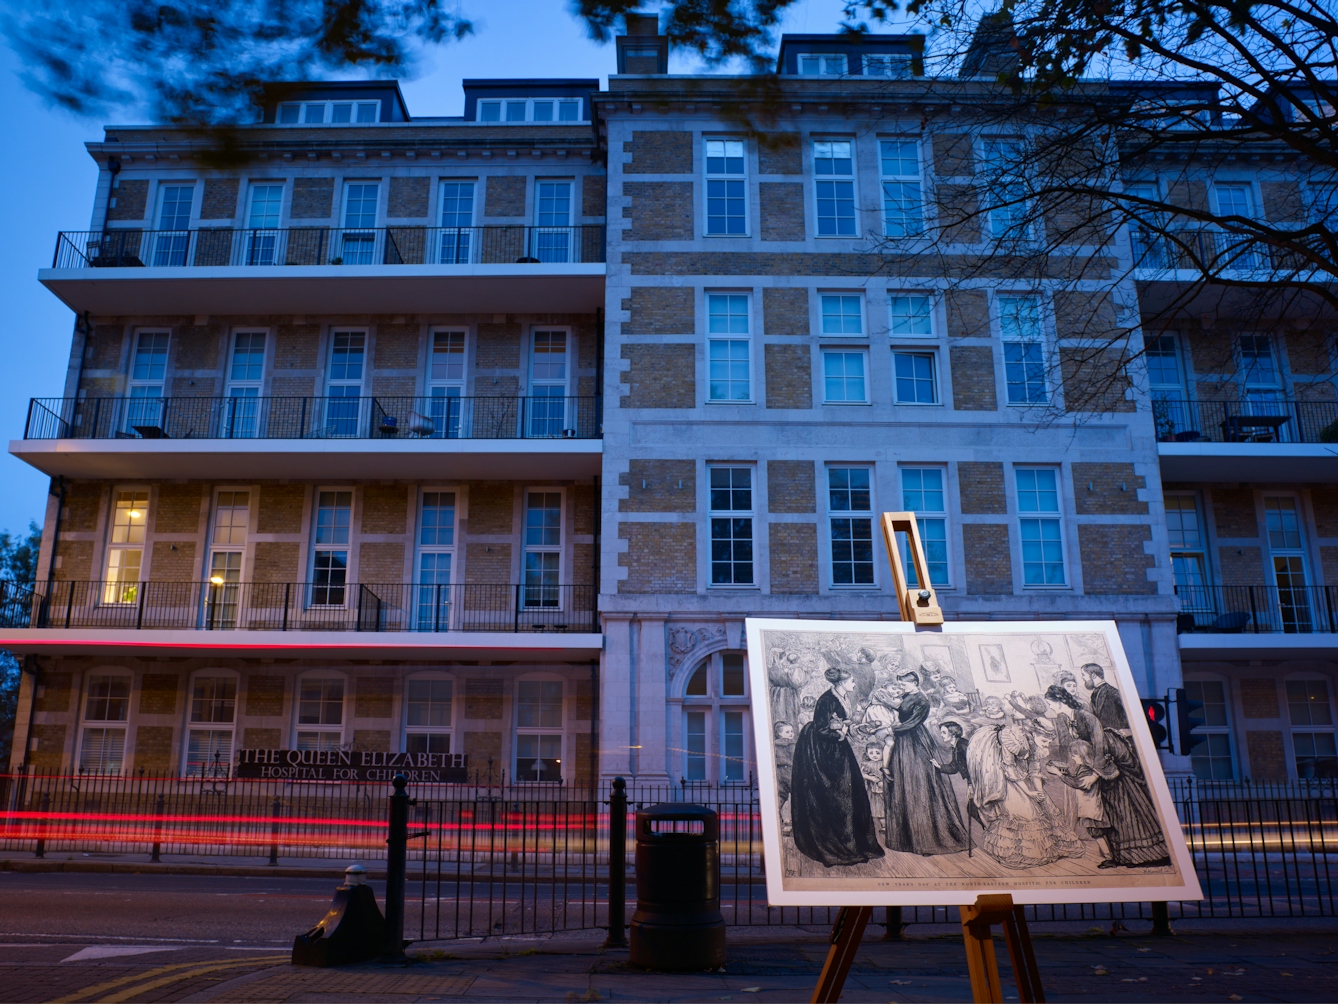 Photograph of the former Queen Elizabeth Children’s Hospital, Hackney Road with an historical image of the hospital displayed in front of it on a wooden artist's easel.